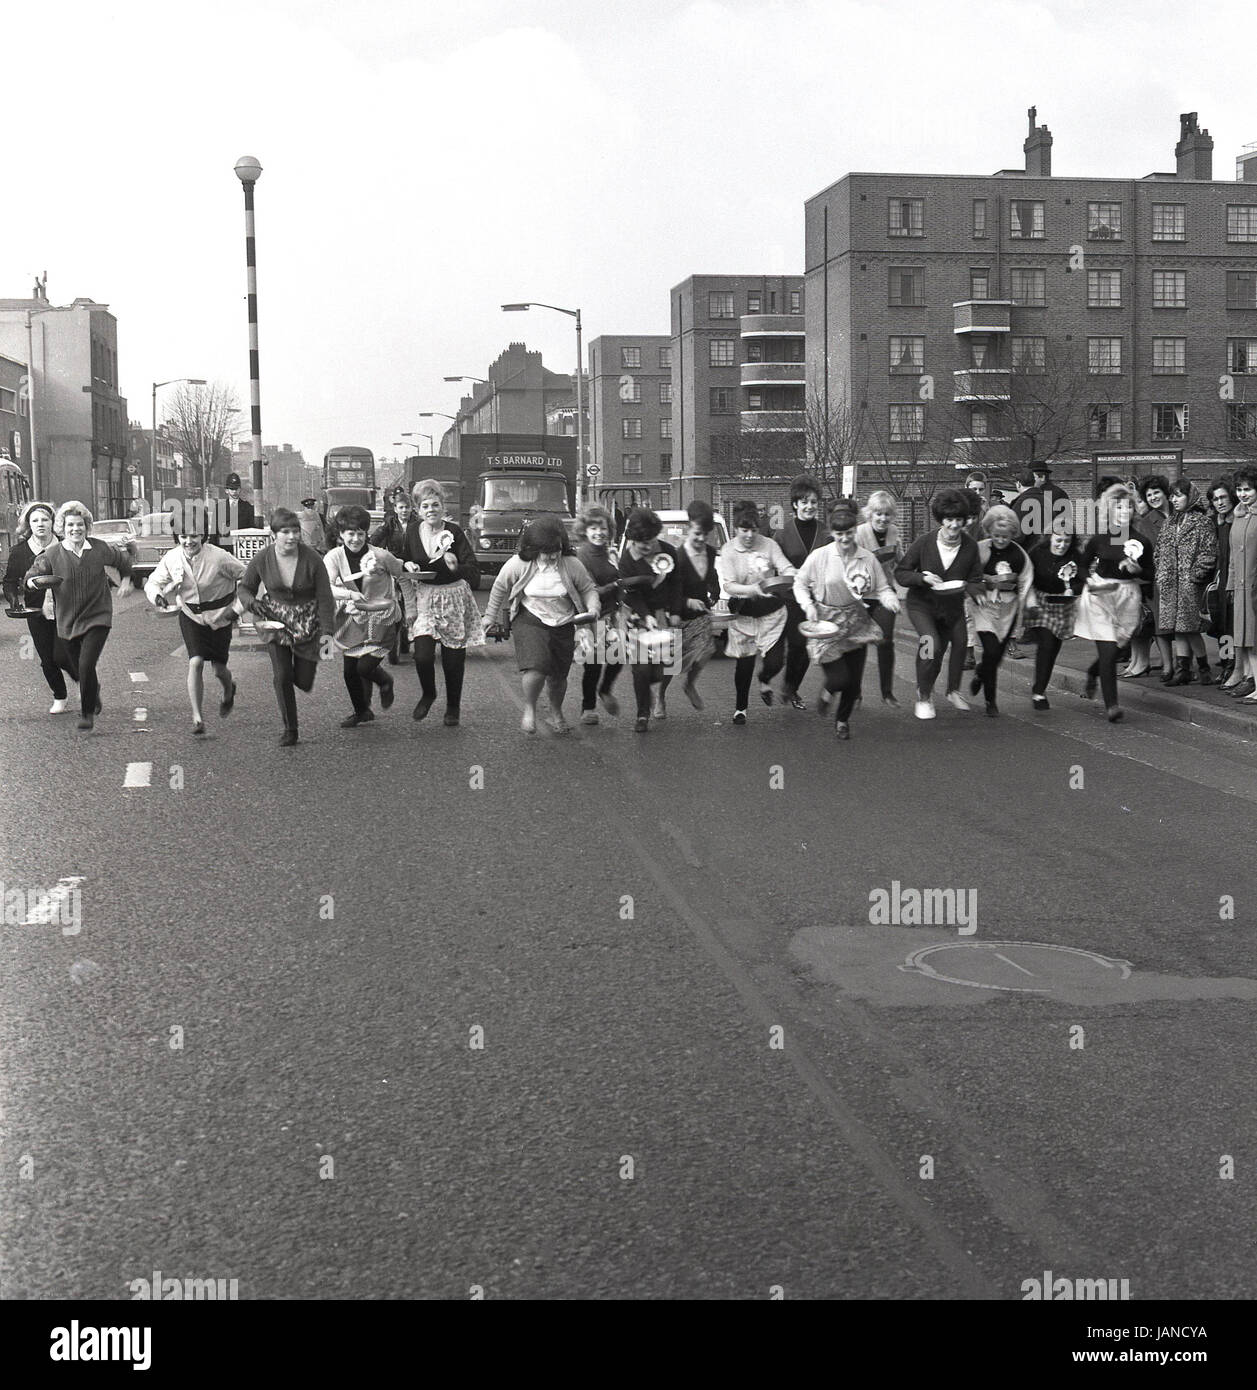 1965, Old Kent Road, Peckham, London and a group of ladies set off in their aprons and carrying pans for the traditional Shrove Tuesday panacke race. Stock Photo